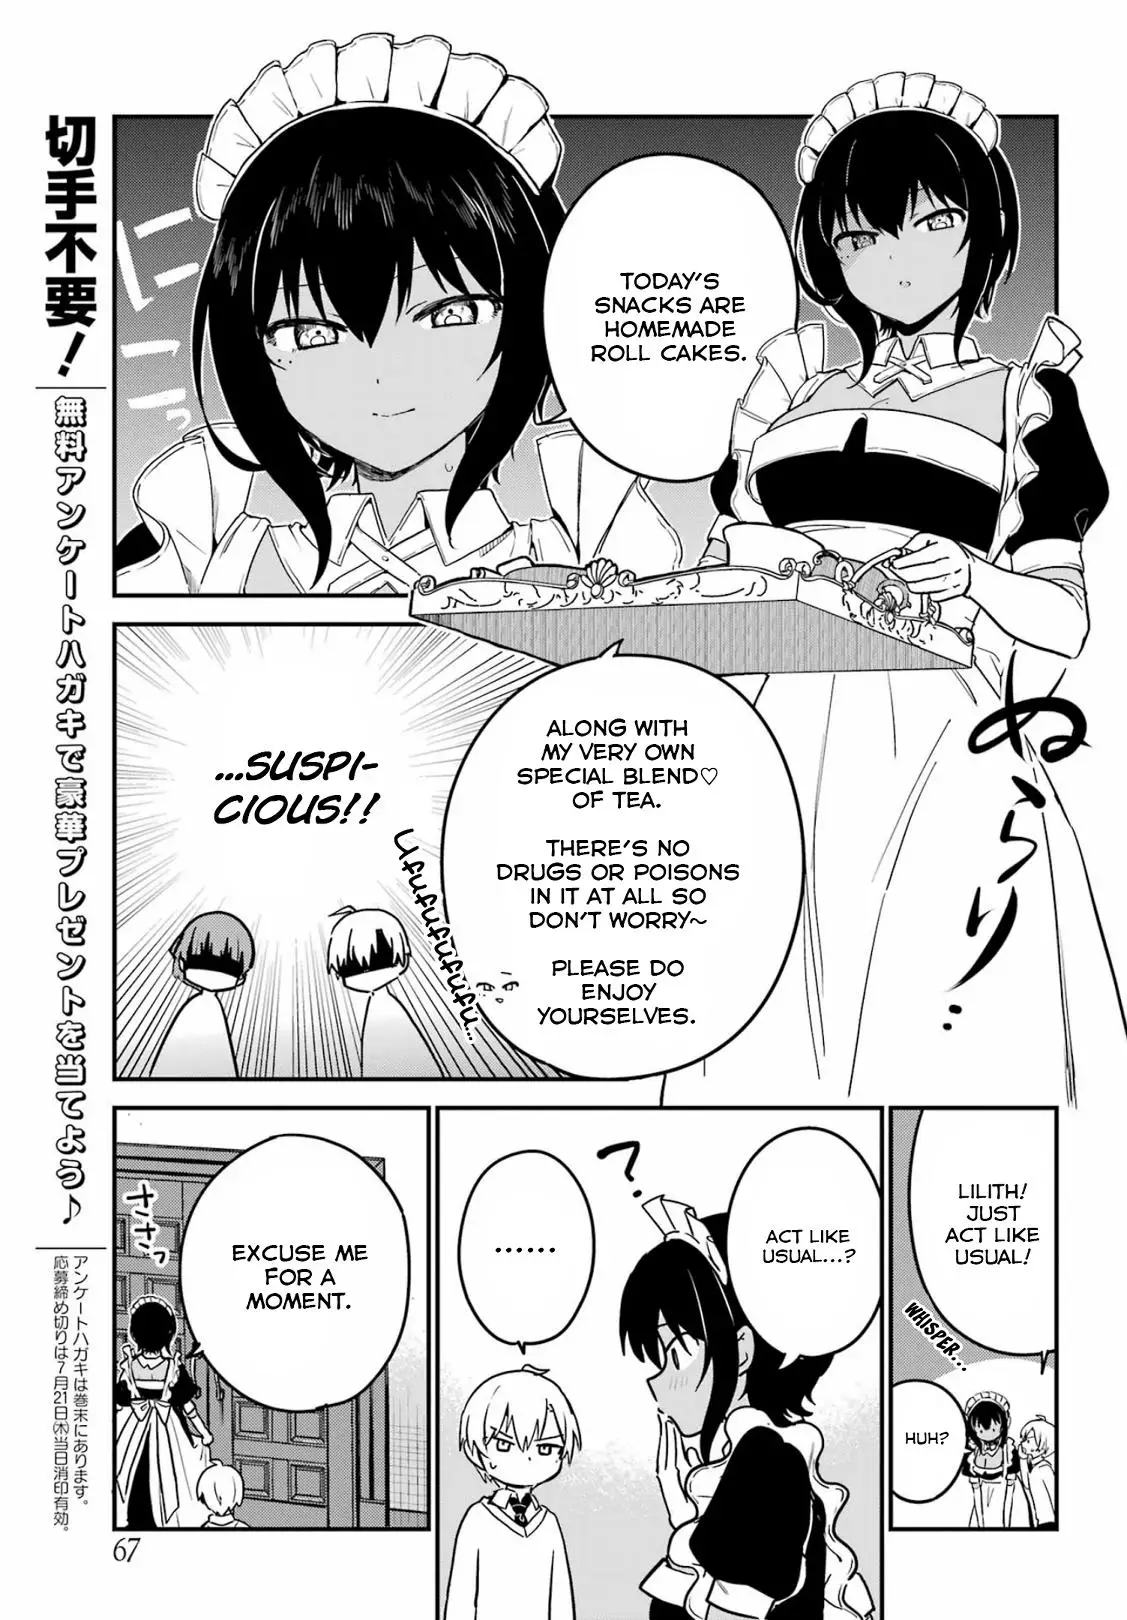 My Recently Hired Maid Is Suspicious - 54 page 7-466c0117